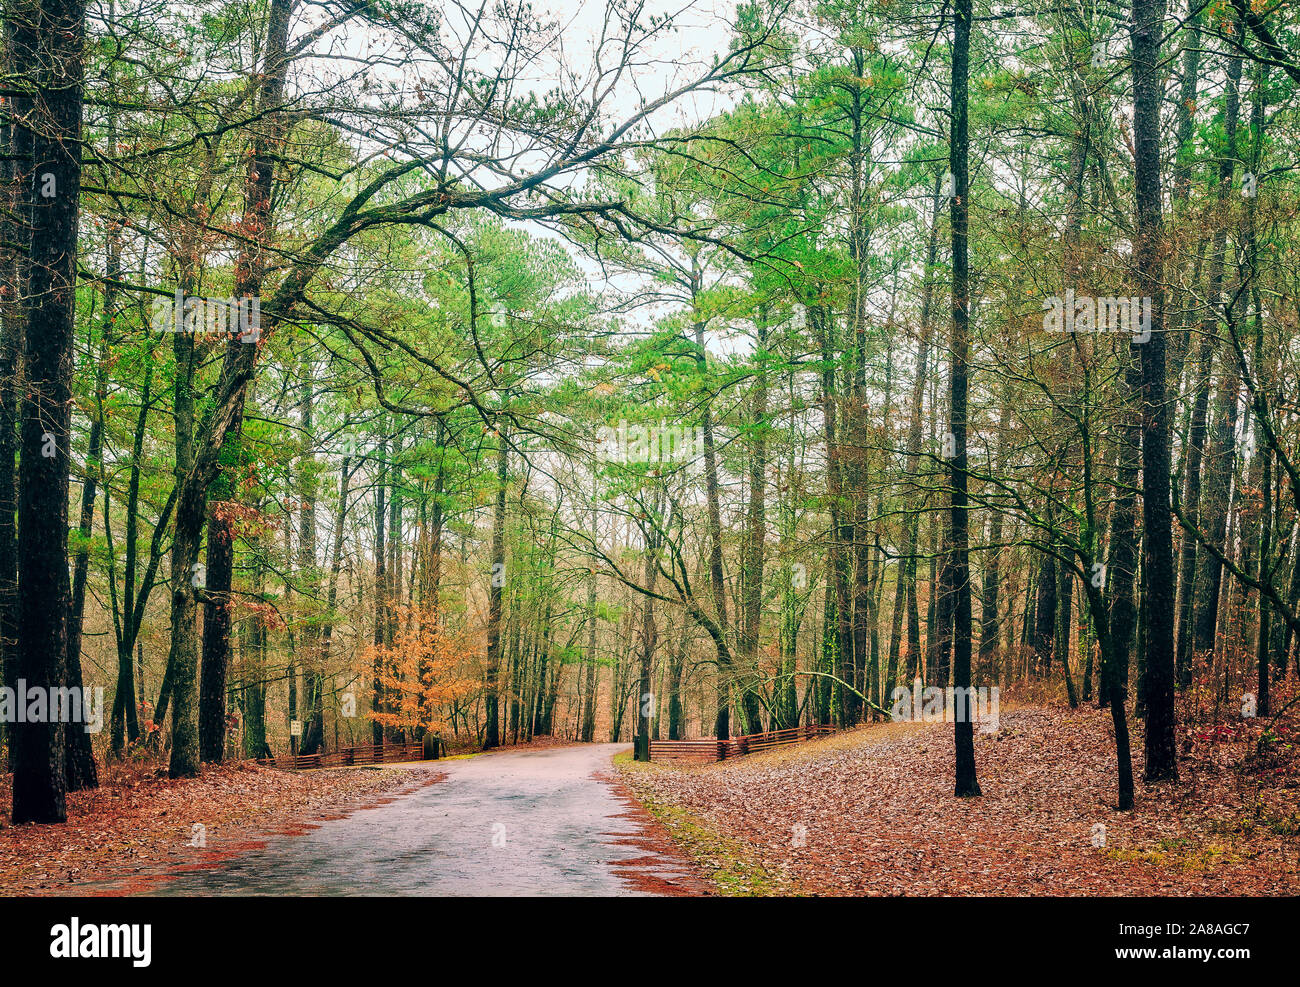 A wet road leads up the hillside at Jeff Busby State Park, located along the Natchez Trace Parkway near Ackerman, Mississippi. Stock Photo